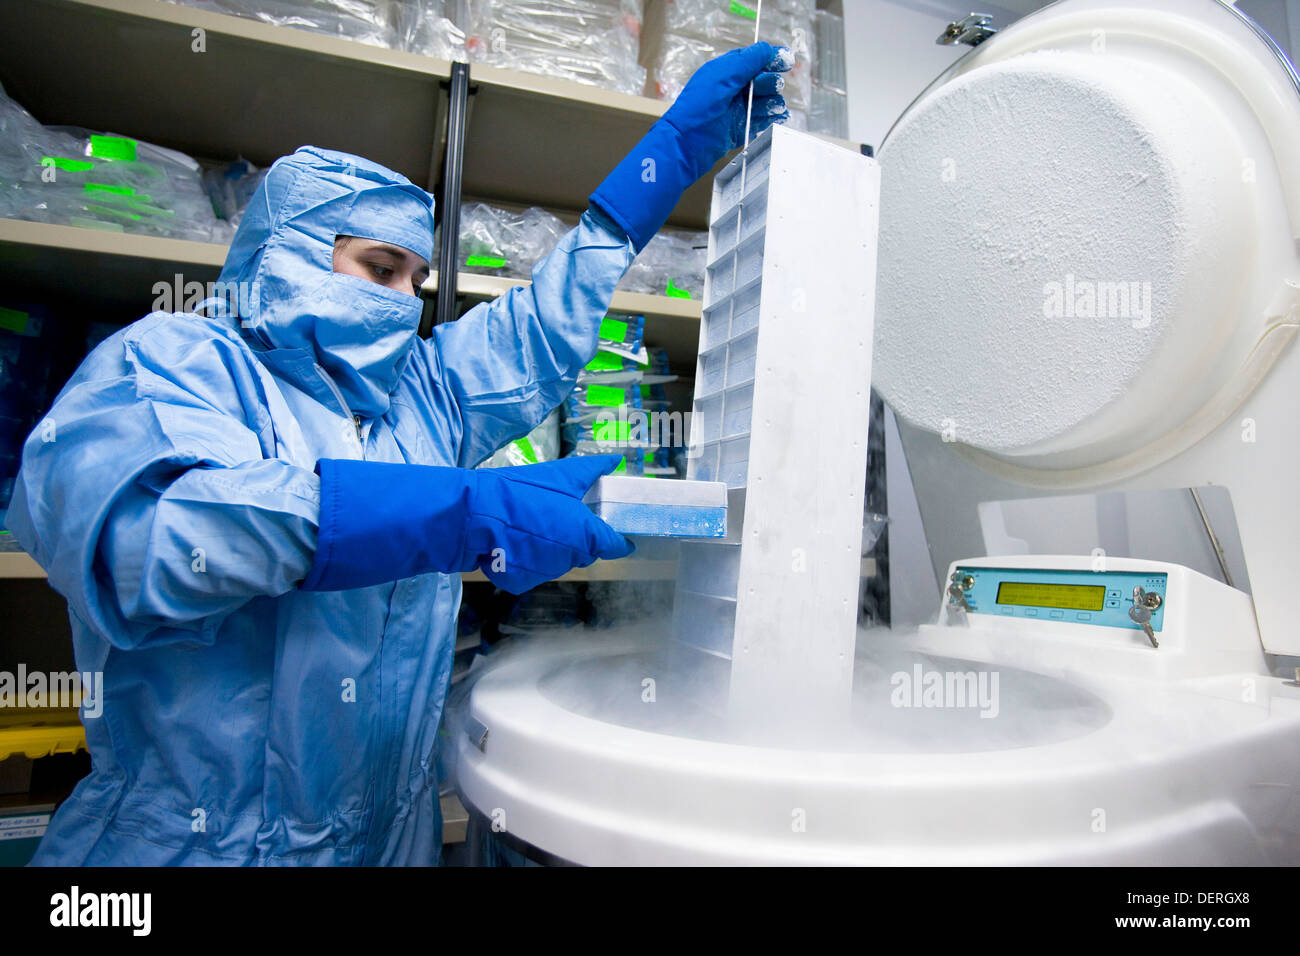 Cryonics cryopreservation of samples in nitrogen biopharmaceutical lab development and production of innovative drugs using Stock Photo